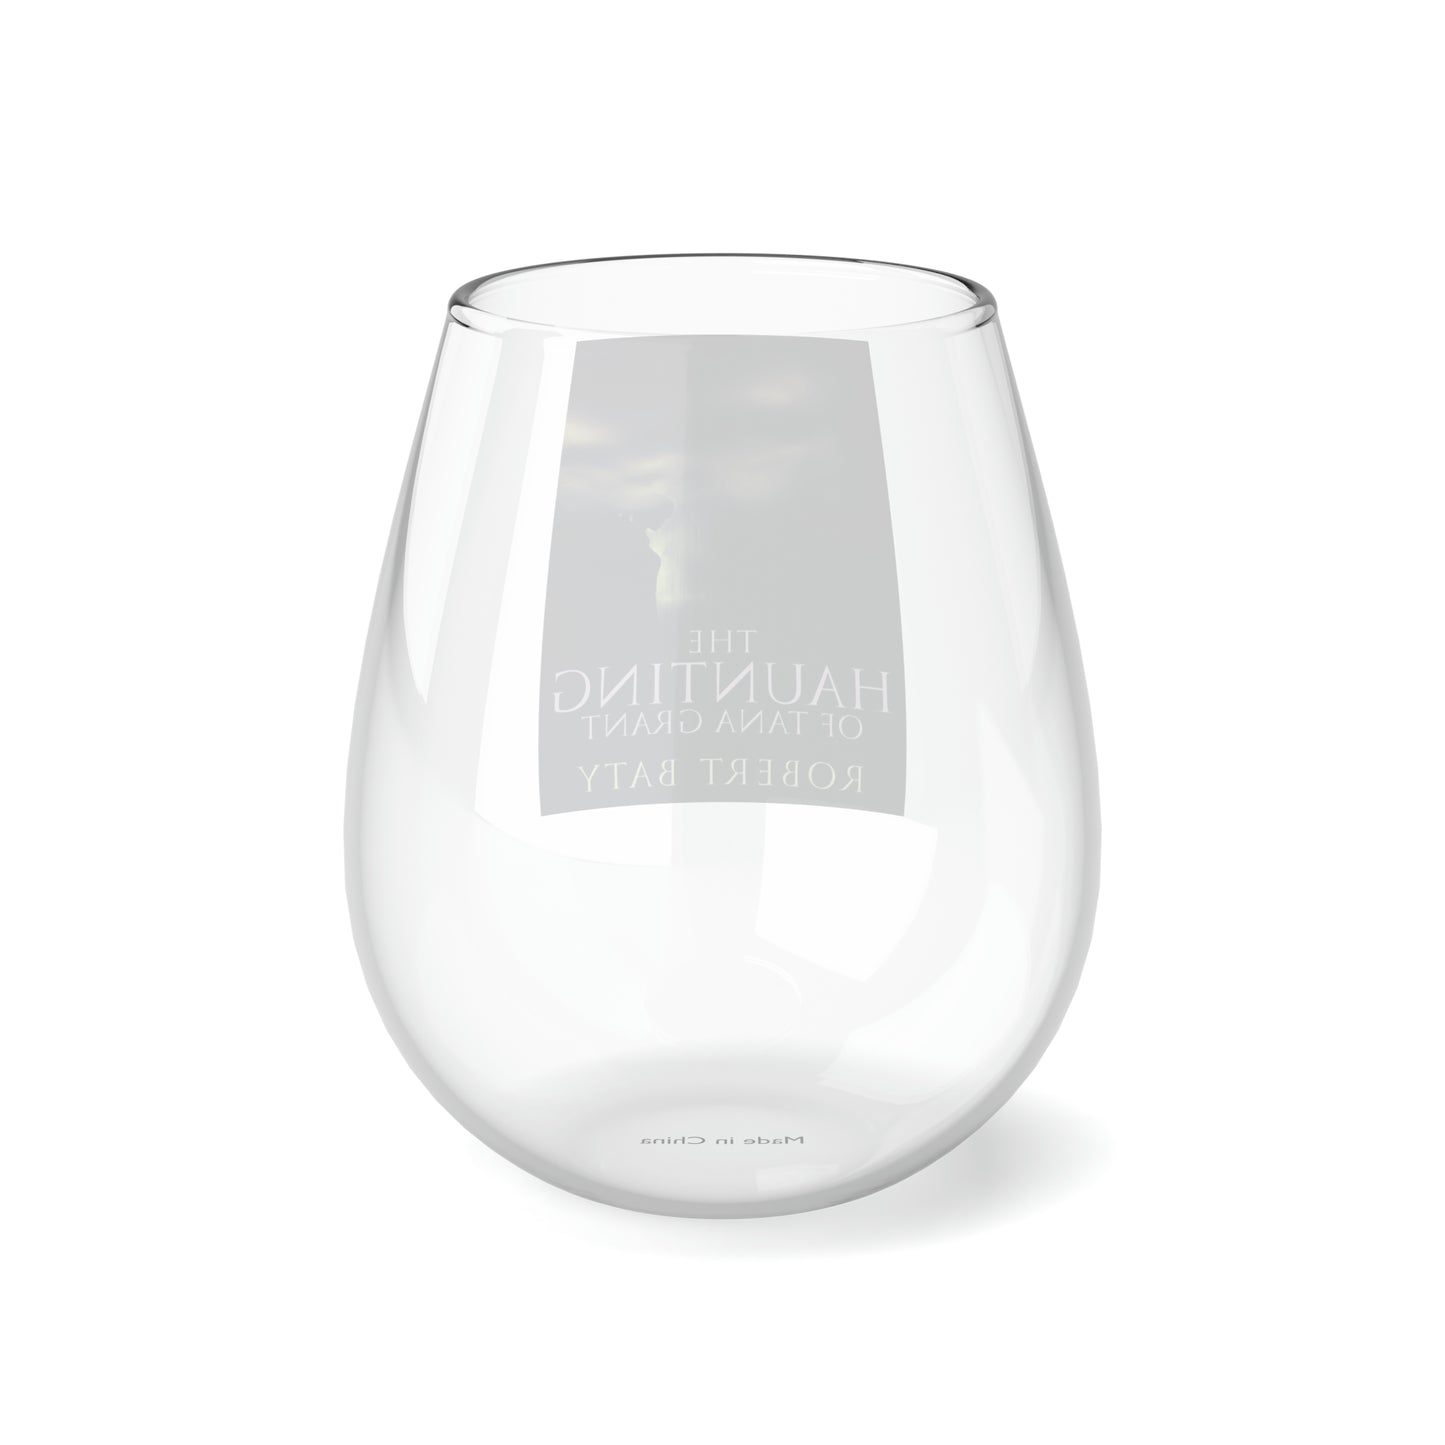 The Haunting Of Tana Grant - Stemless Wine Glass, 11.75oz